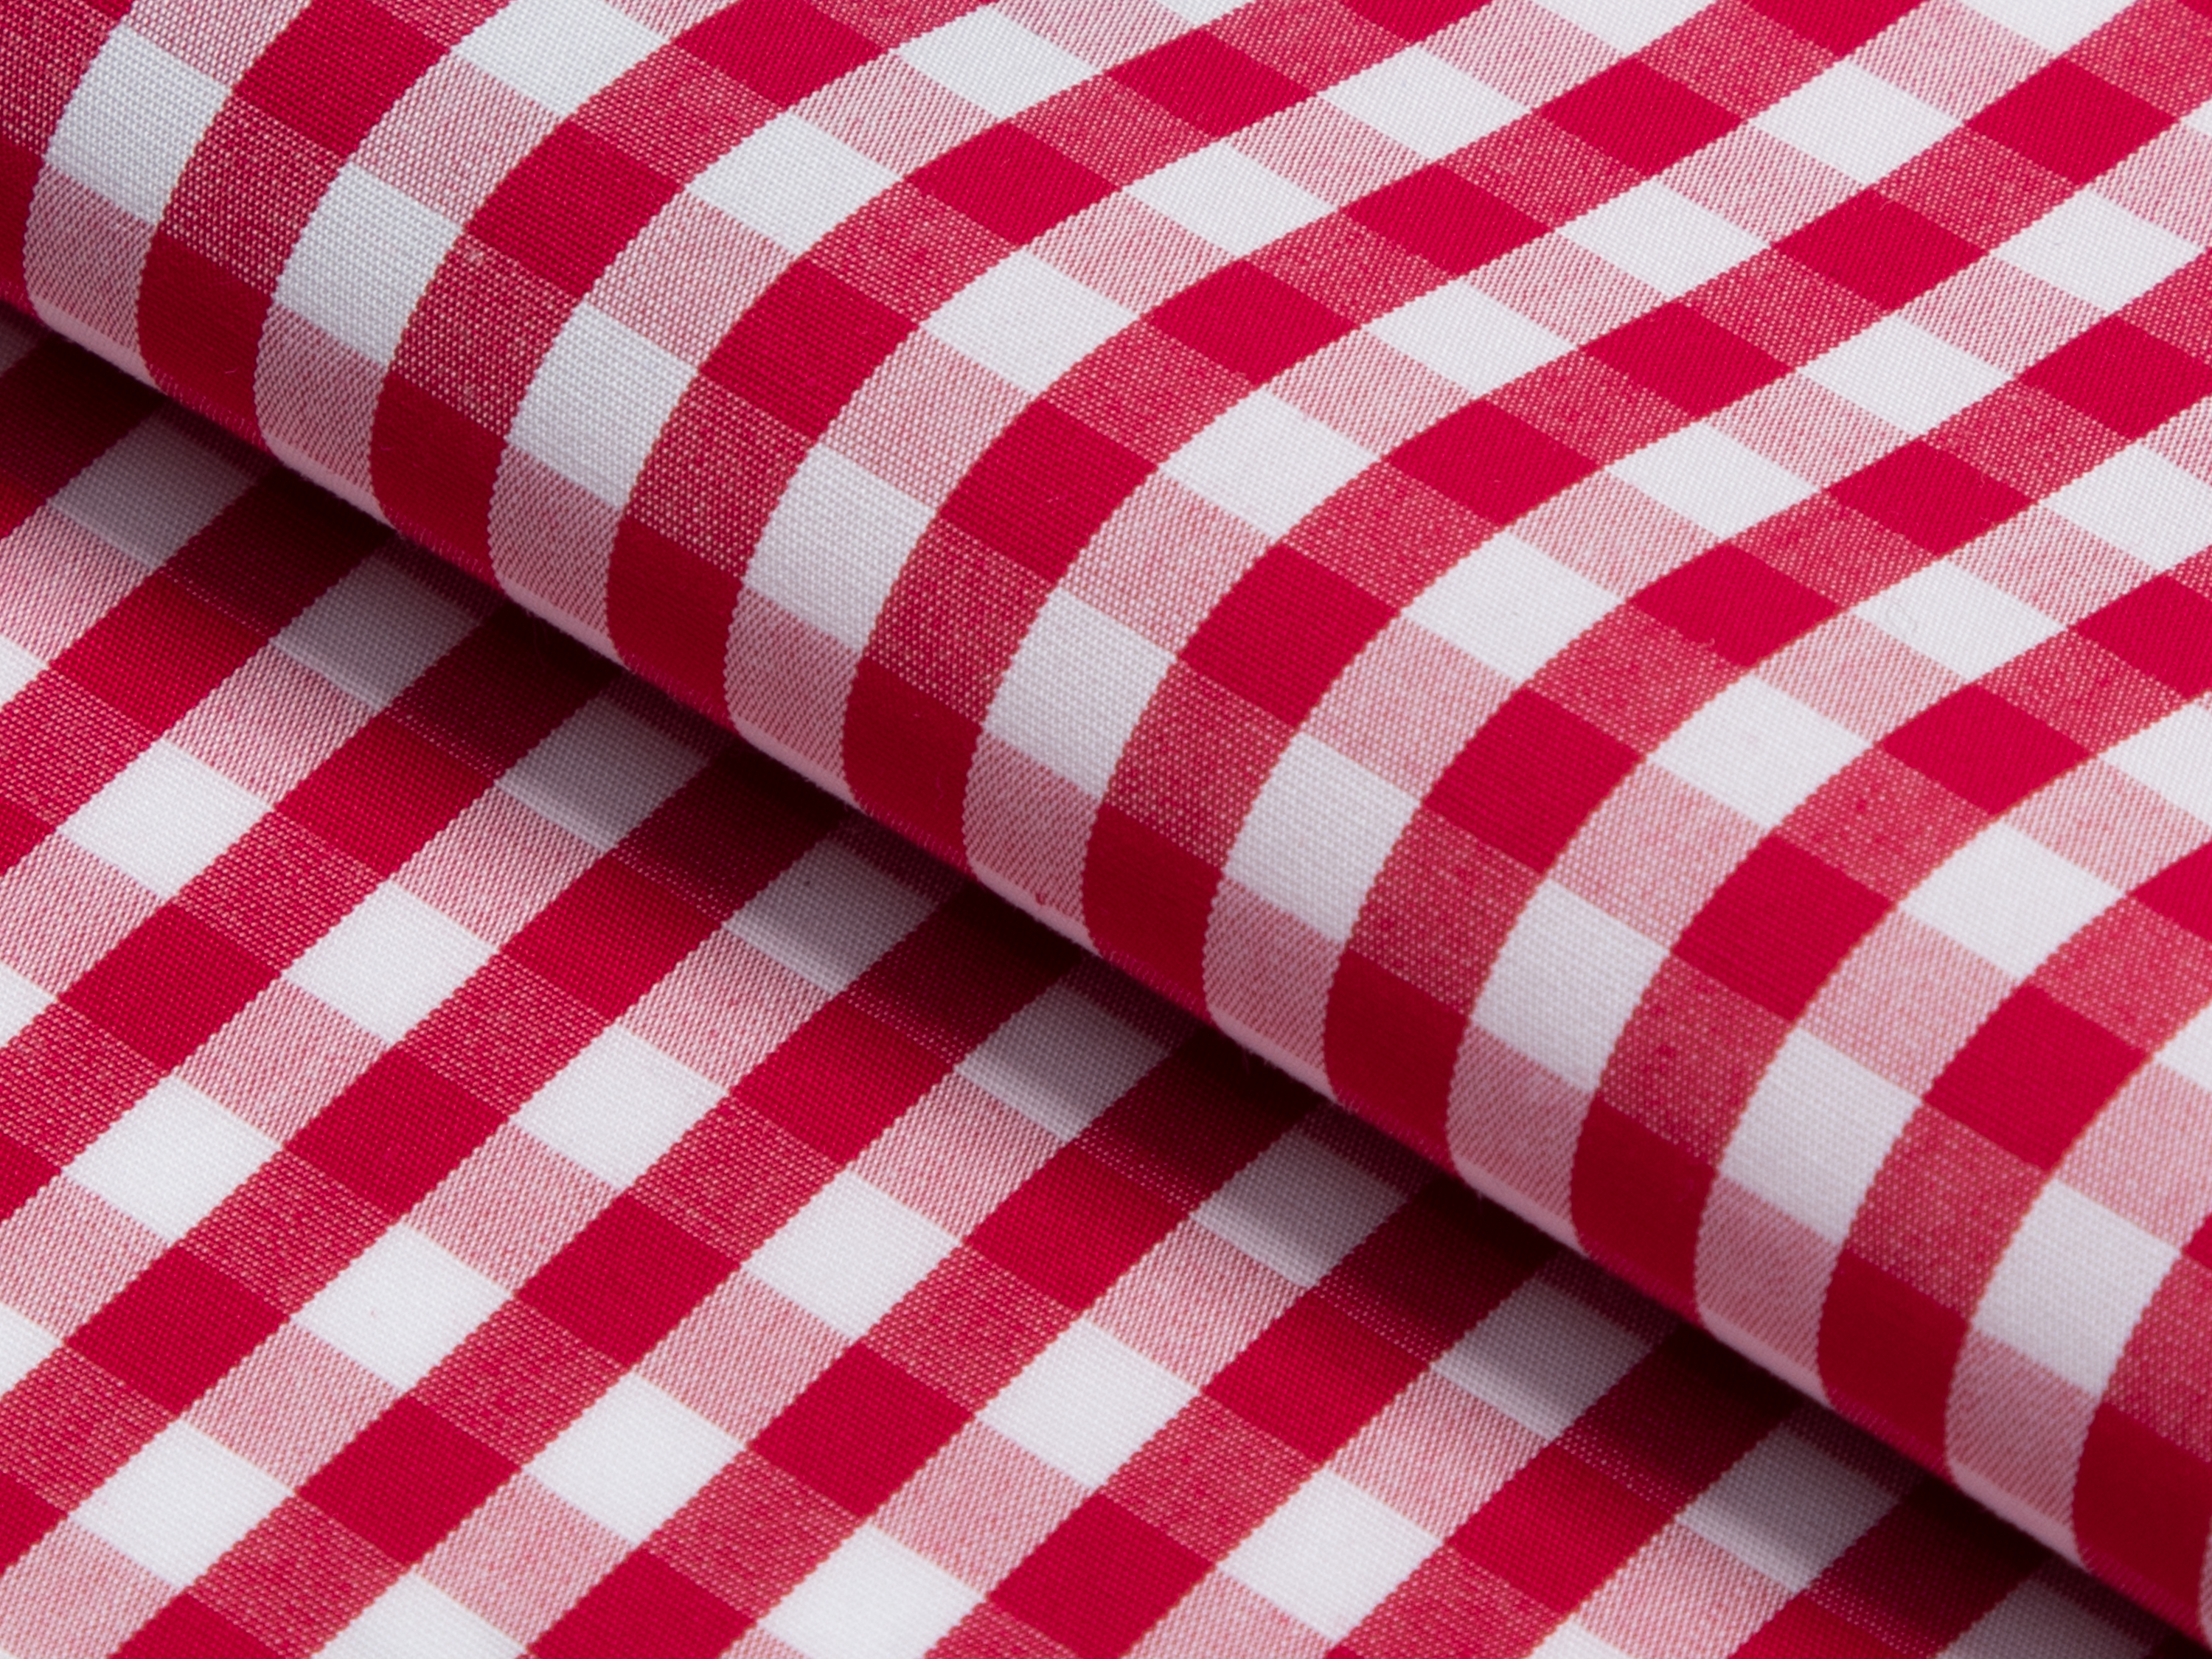 Buy tailor made shirts online - GINGHAM LUXURY  - Gingham Red